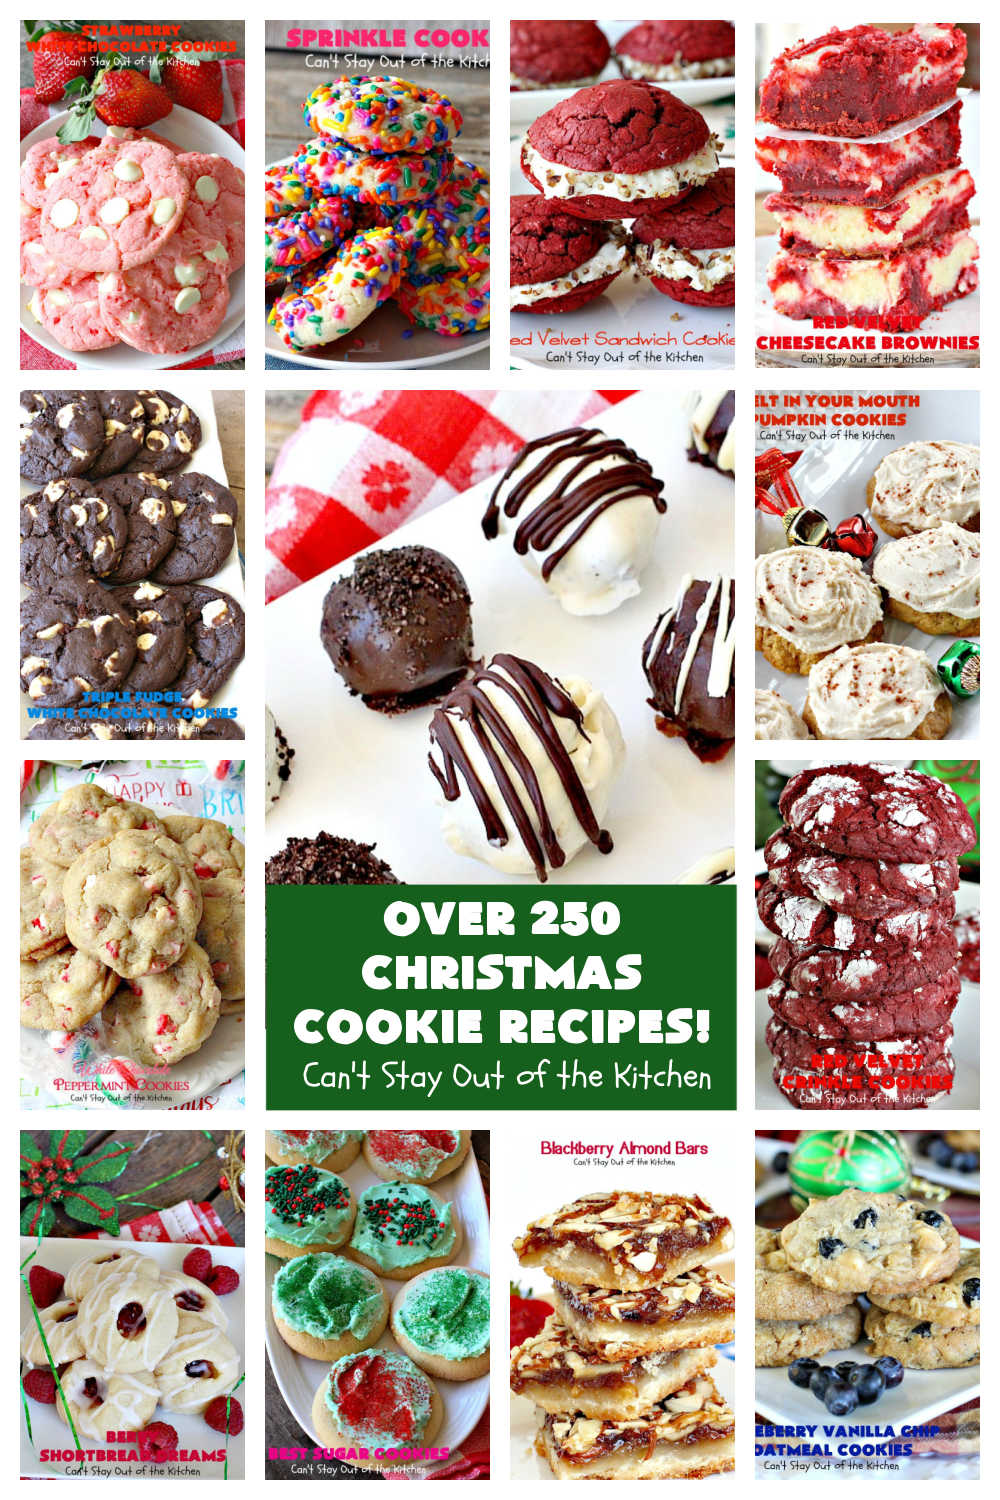 Christmas Cookies | Can't Stay Out of the Kitchen | Over 250 favorite #ChristmasCookies including #lemon #chocolate #cherry #thumbprint #RedVelvet #funfetti #pumpkin #PeanutButter #apricot #raspberry #fruitcake. So many delightful #cookies to bake for a #ChristmasCookieExchange or #HolidayBaking. #dessert